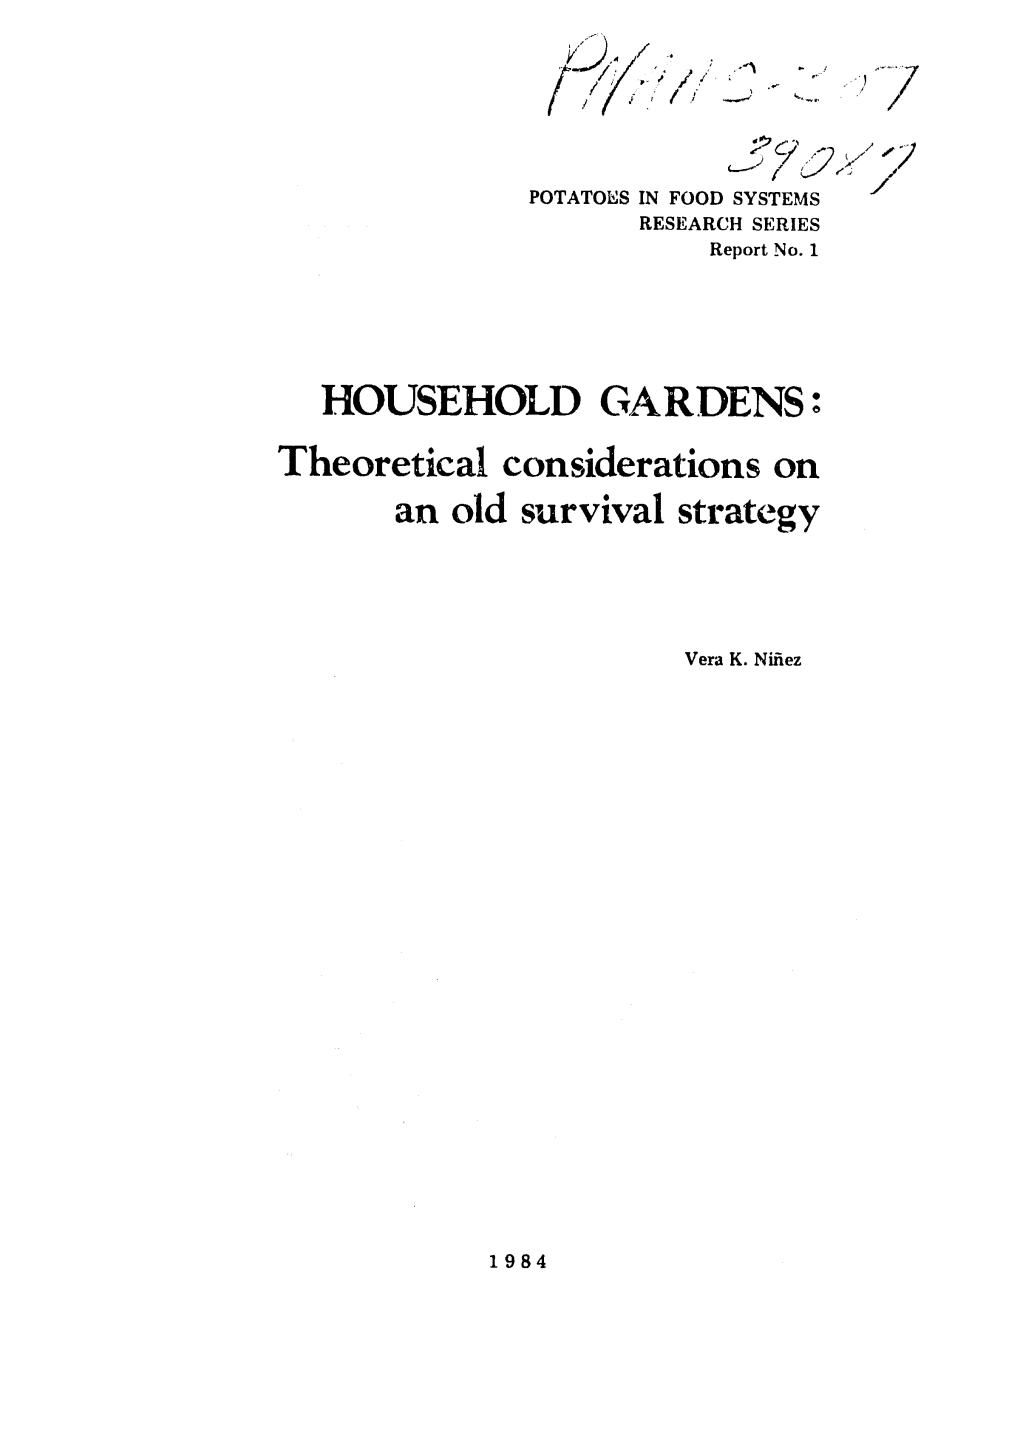 HOUSEHOLD GARDENS: Theoretical Considerations on an Old Survival Strategy